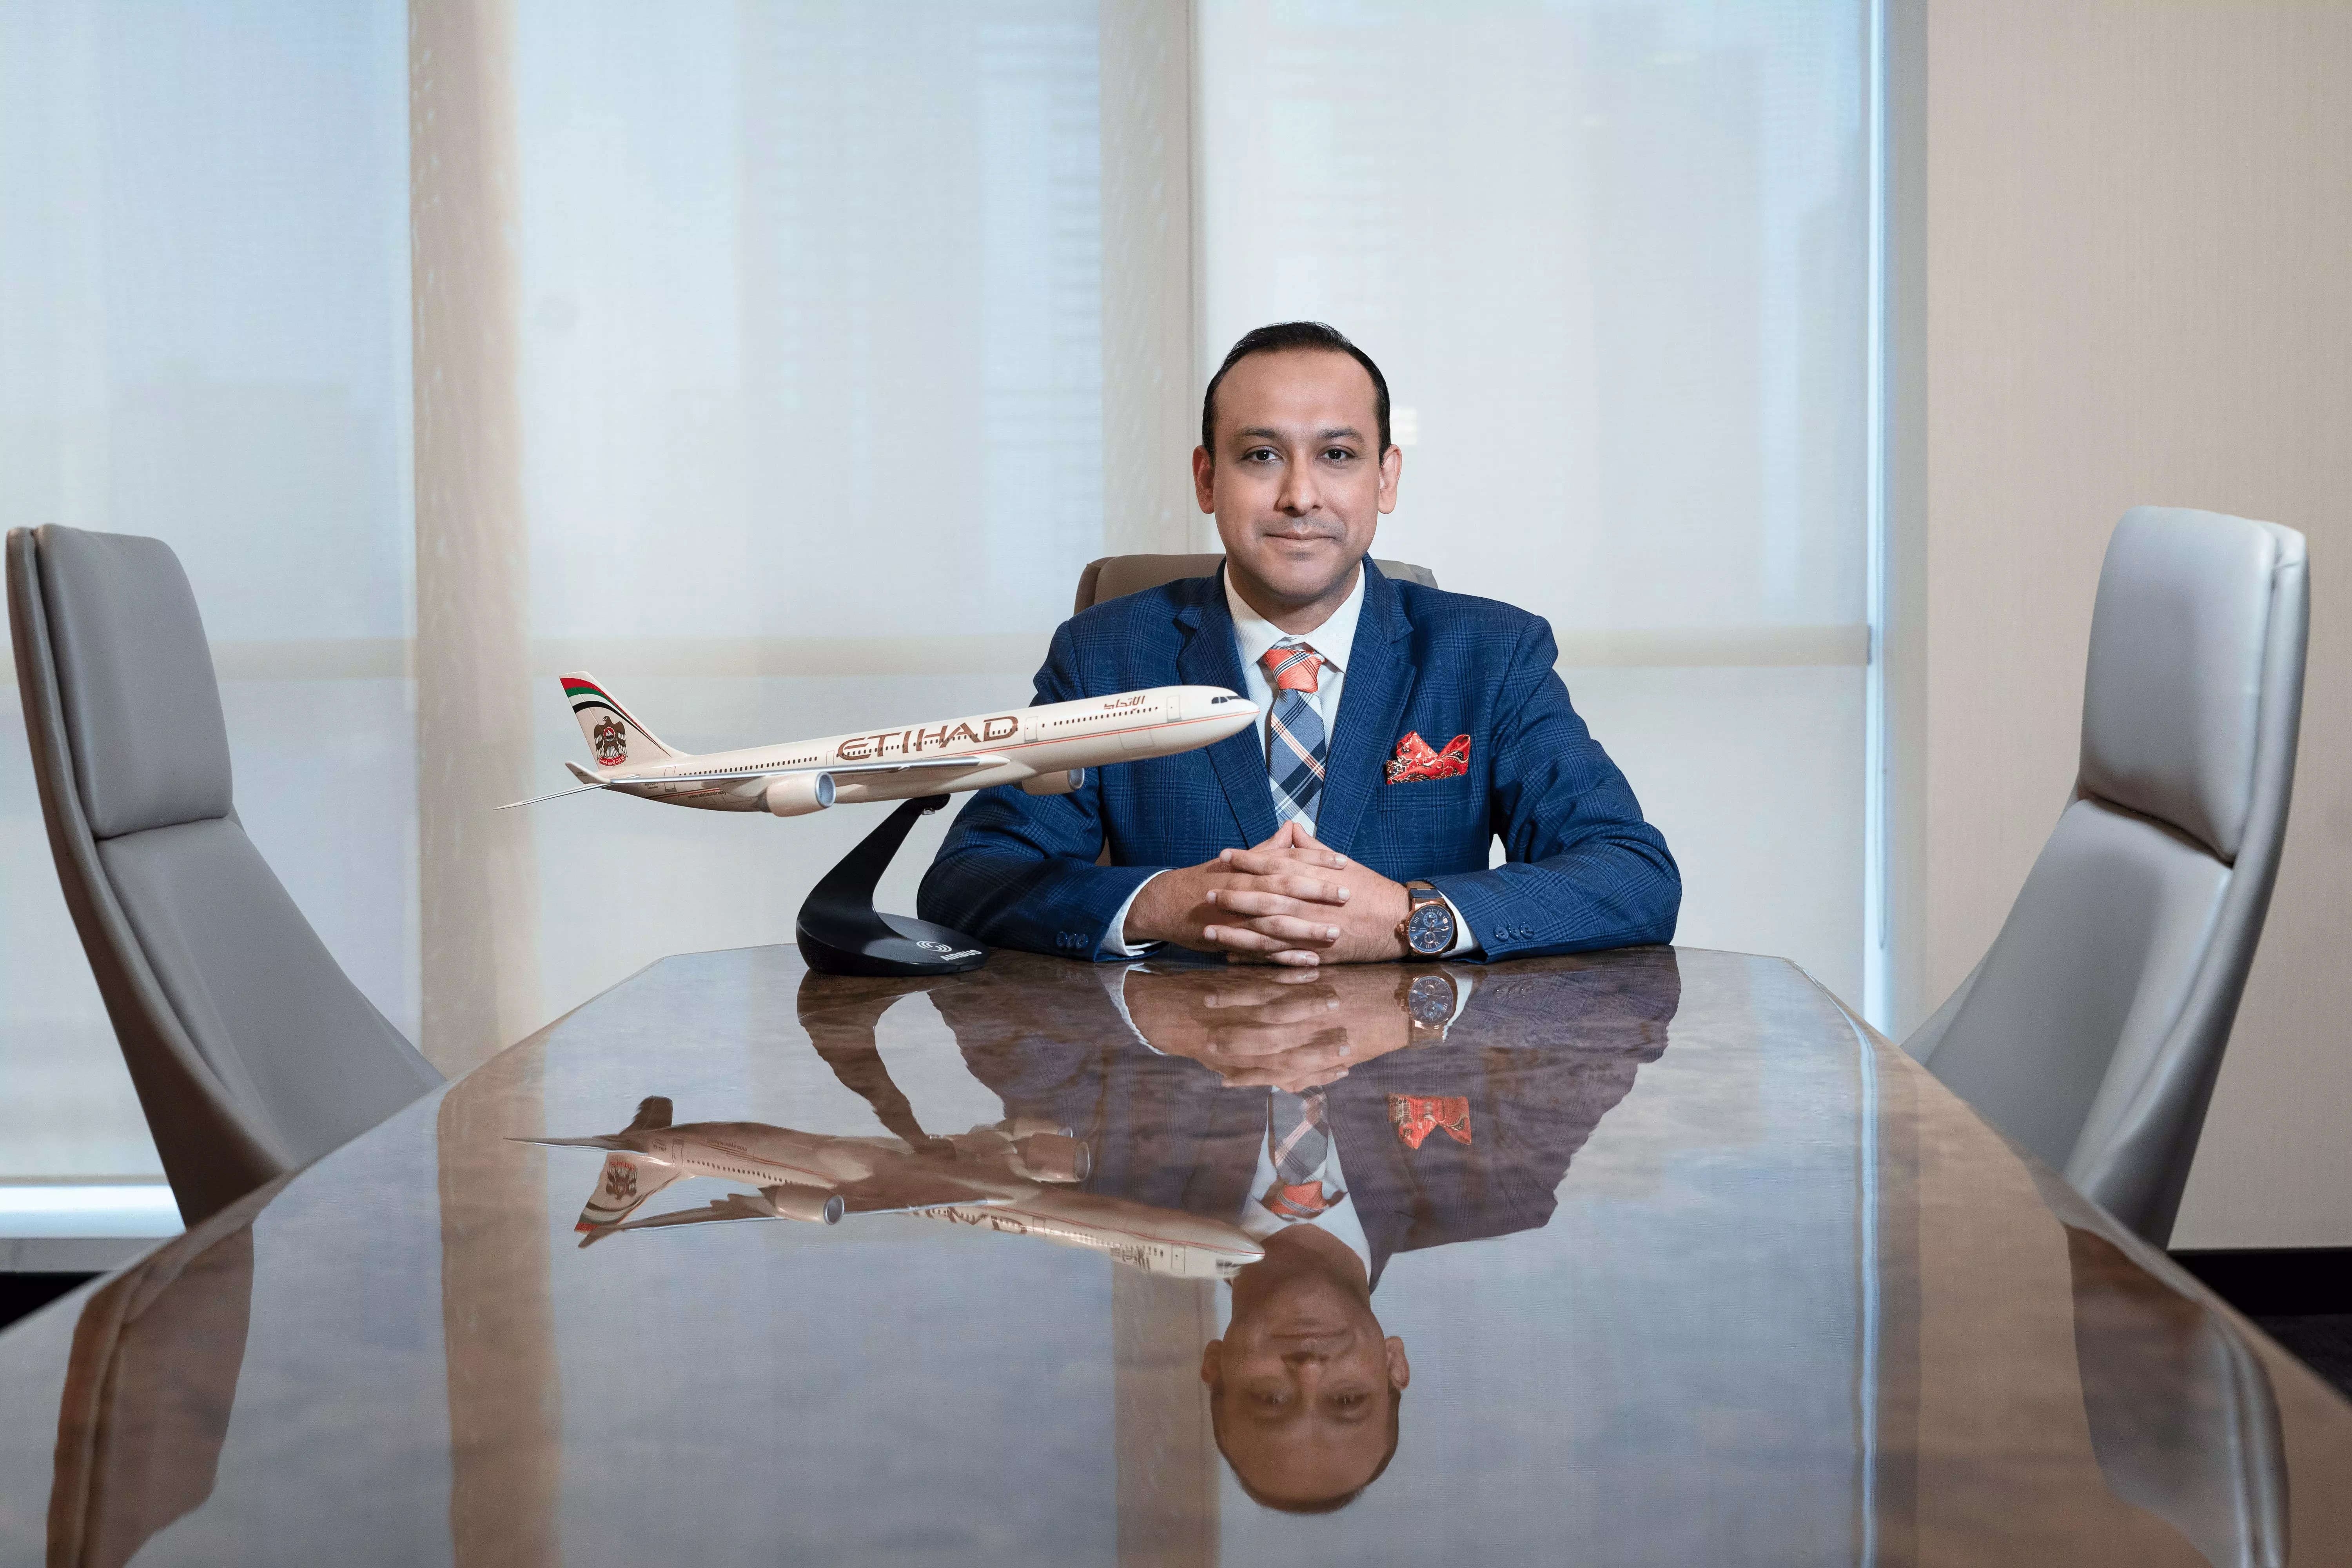 Salil Nath to be the new Etihad Airways General Manager for Indian subcontinent after Neerja Bhatia retires